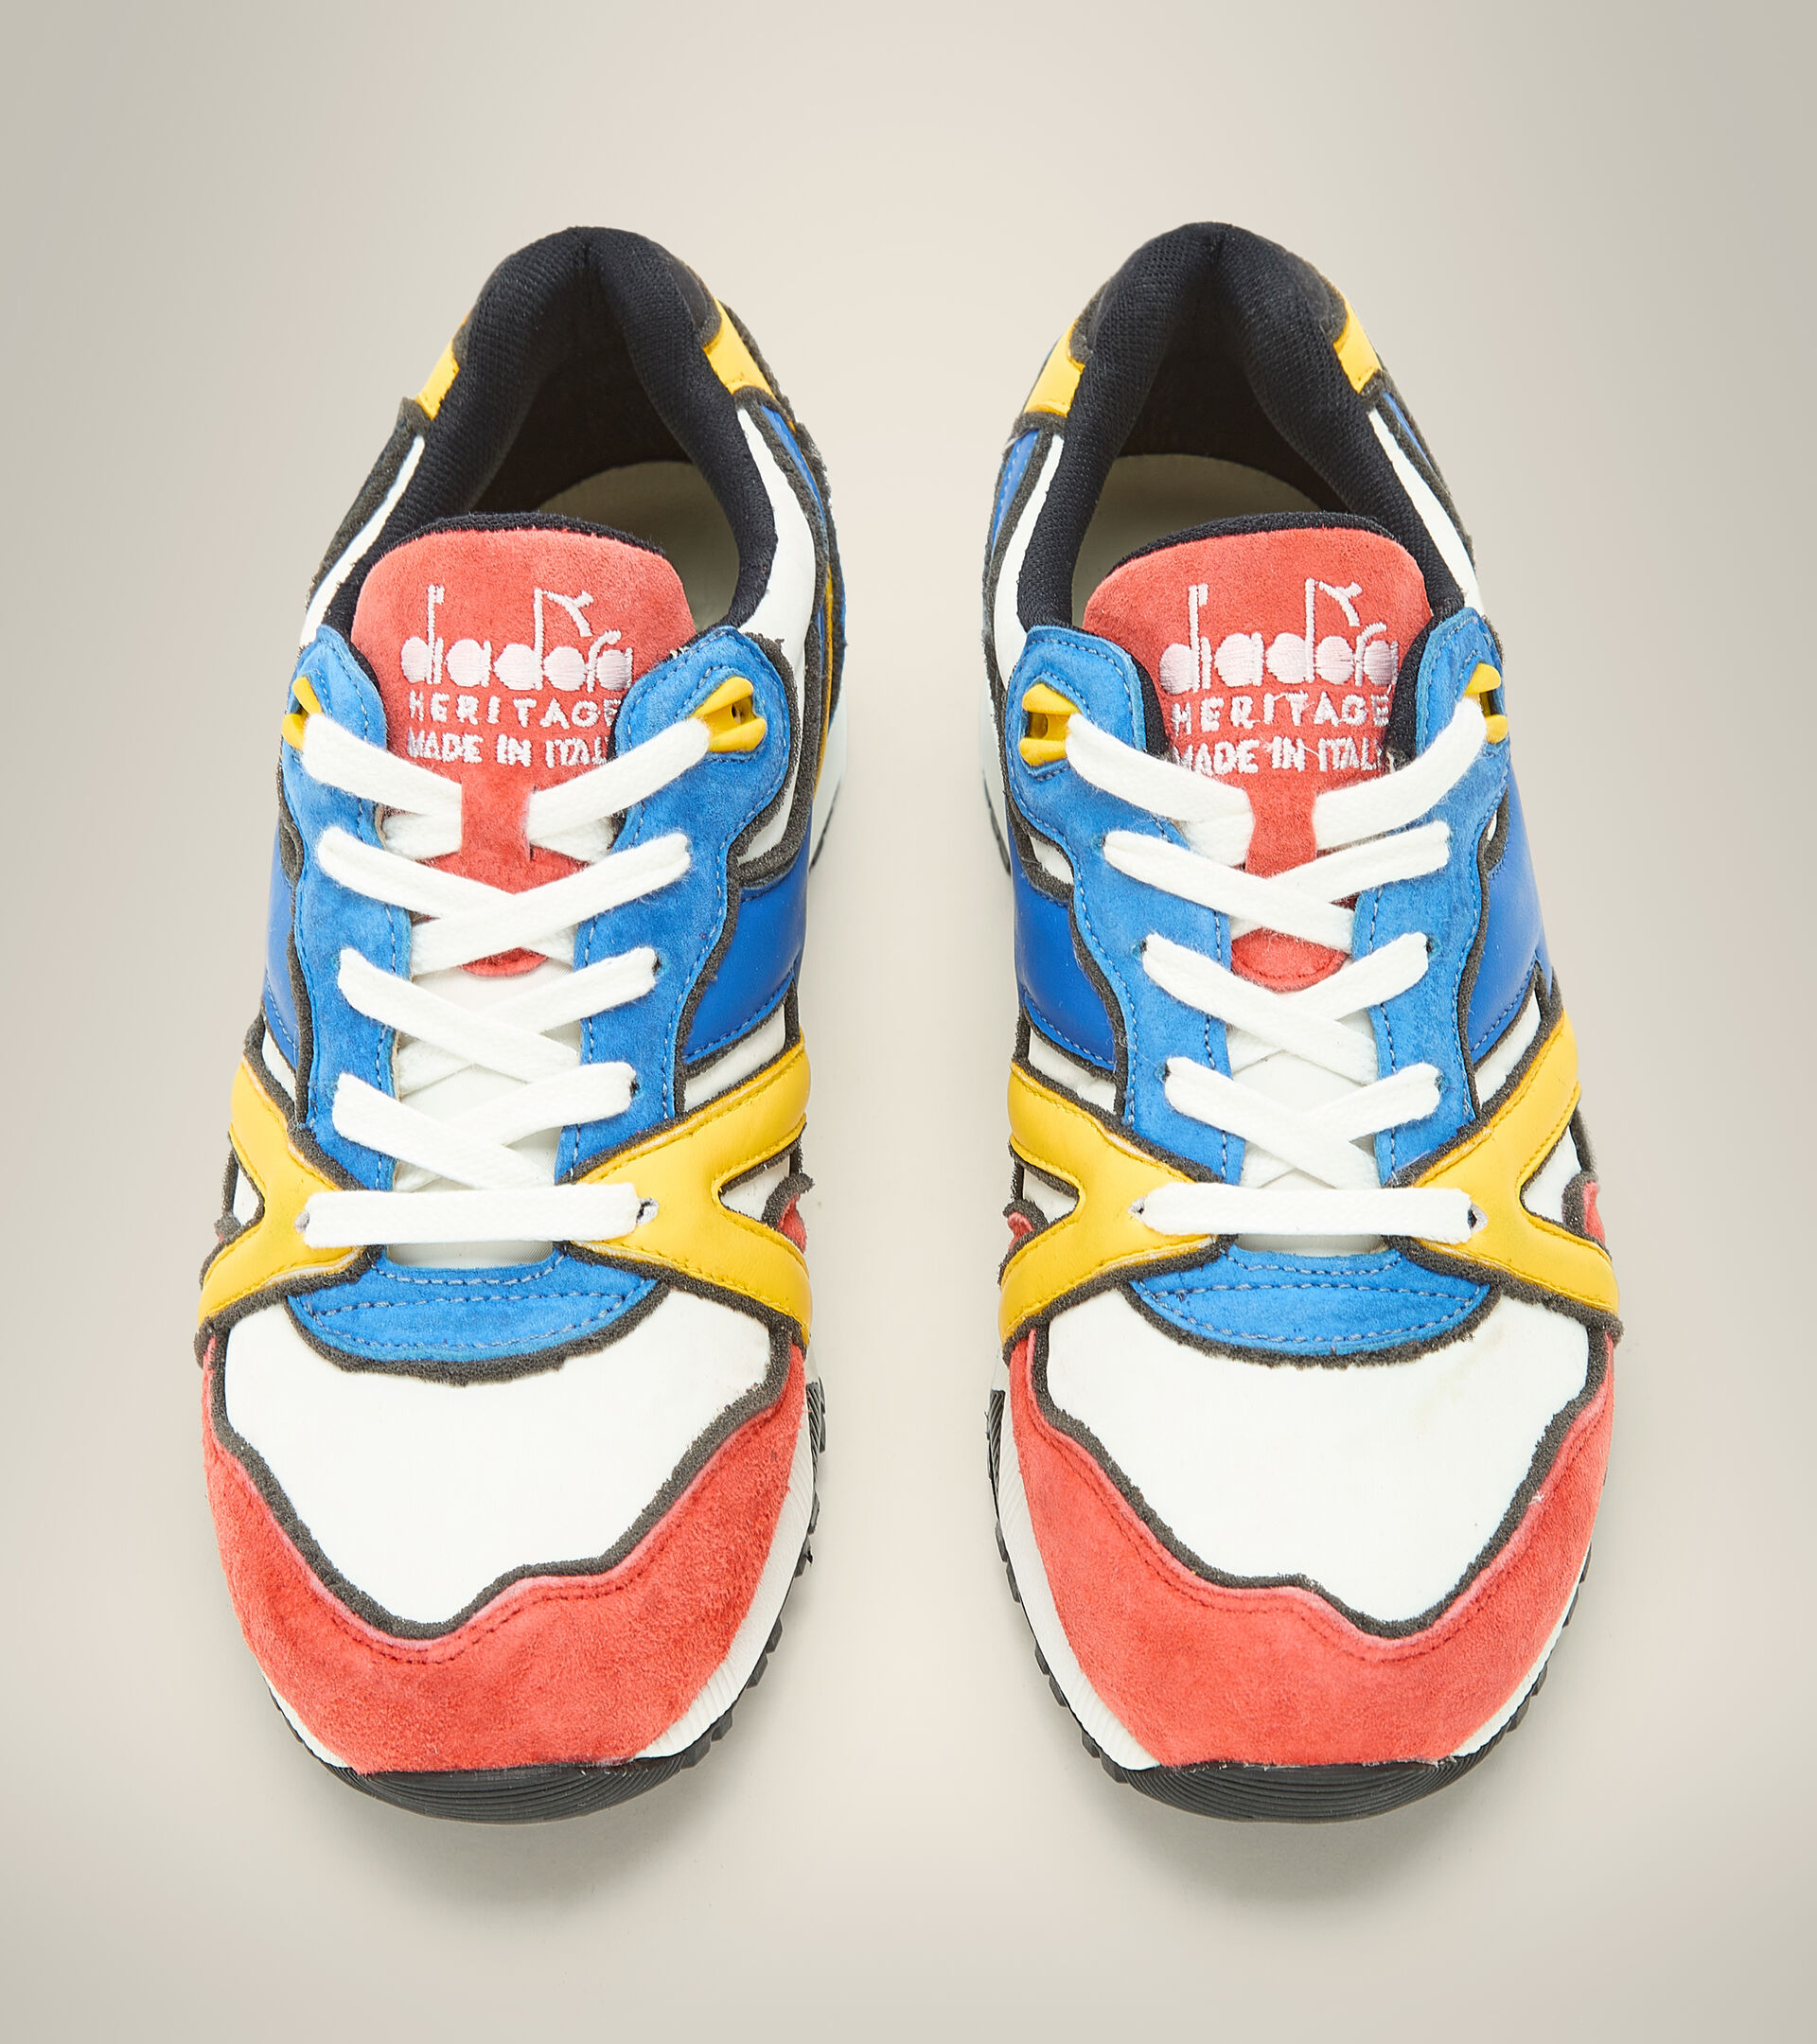 Heritage shoes - Made in Italy - Unisex N9000 DESSAU WHITE - Diadora